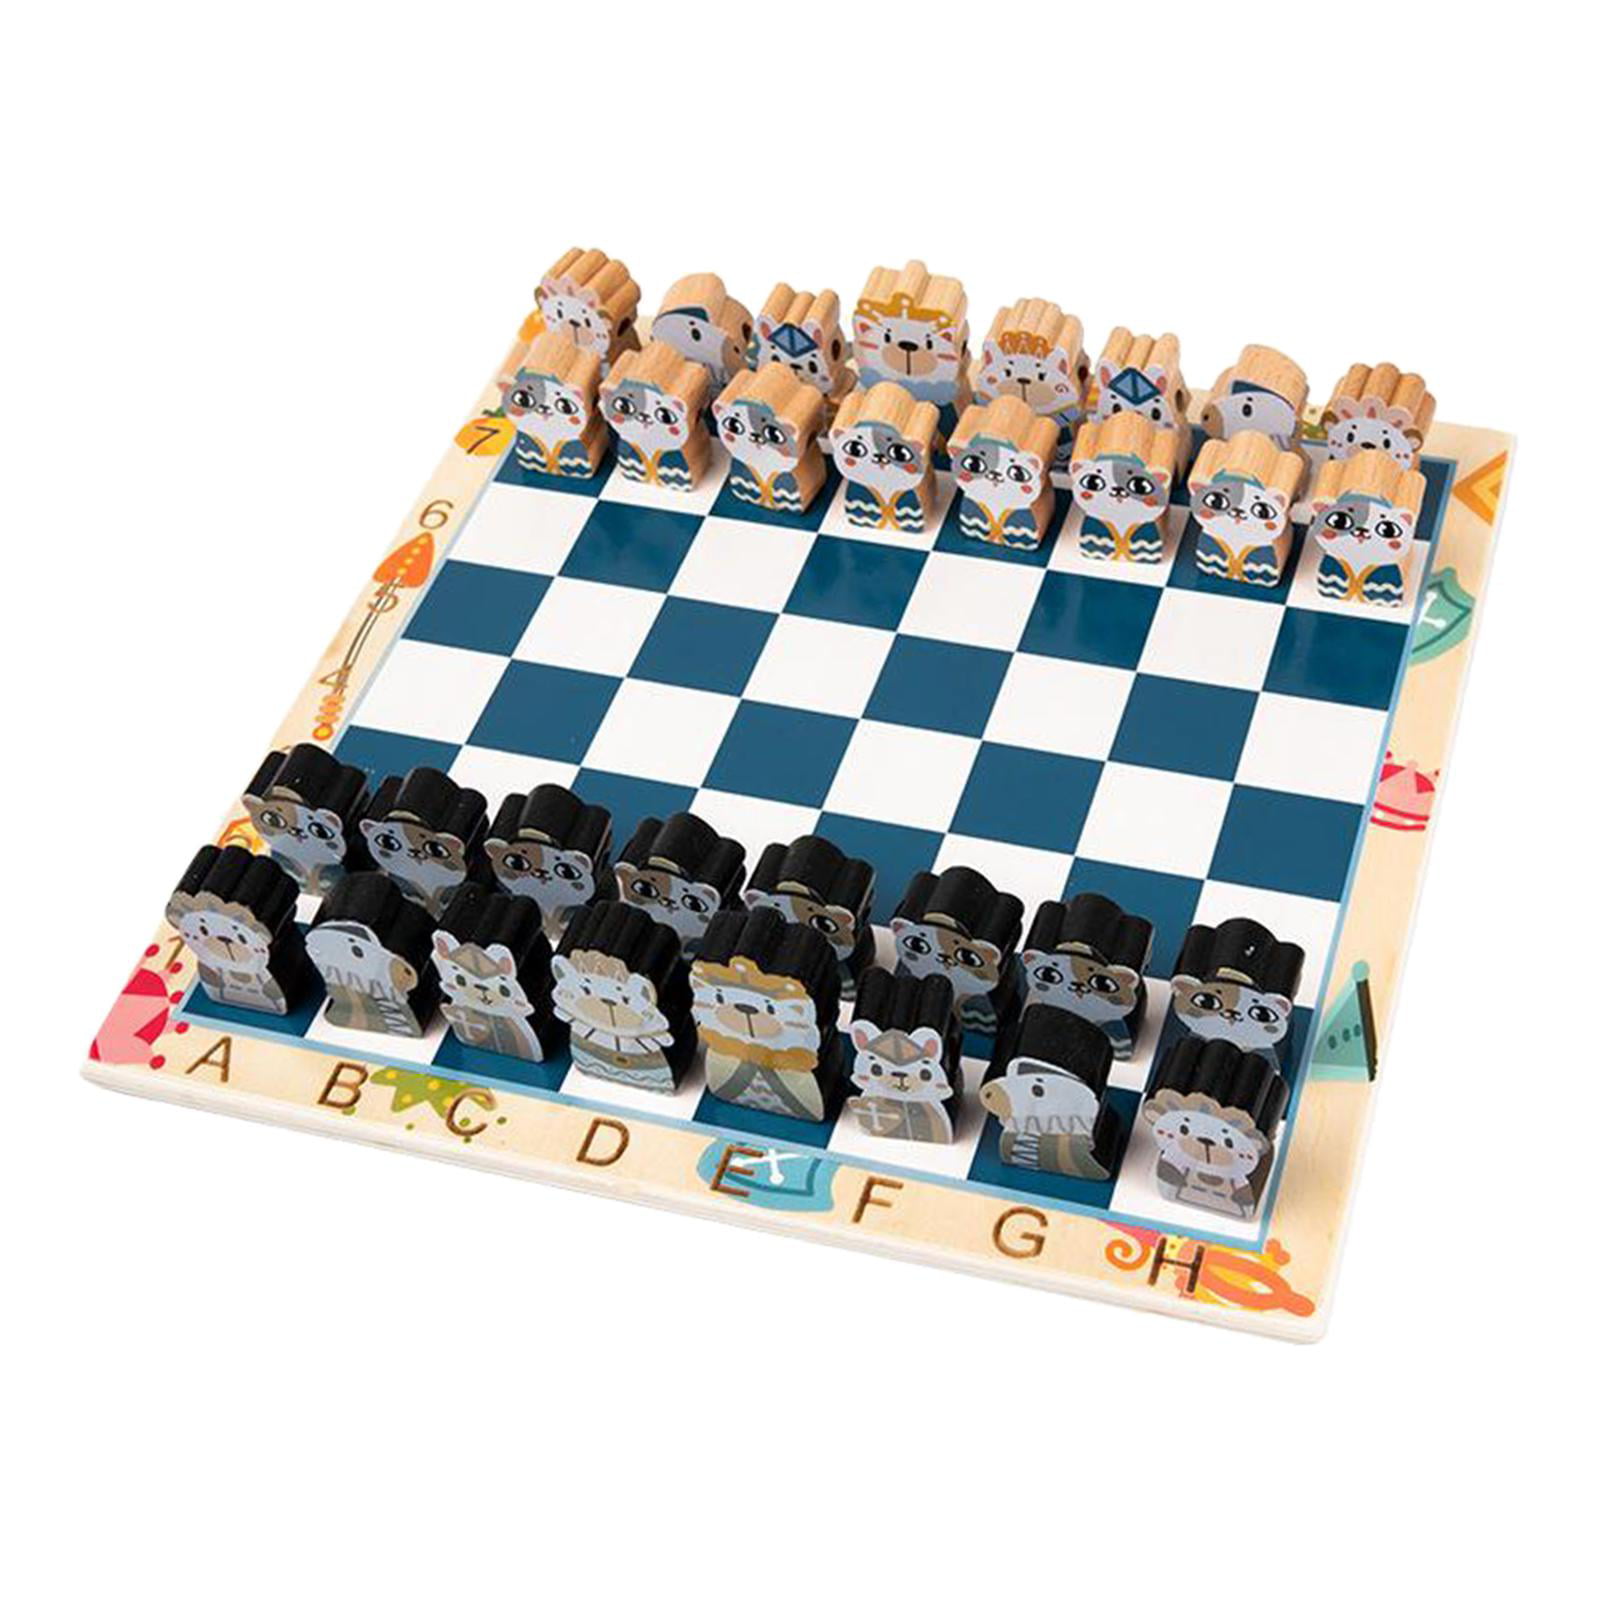 Themed Chess Sets and Boards  Fun Novelty Chess Sets